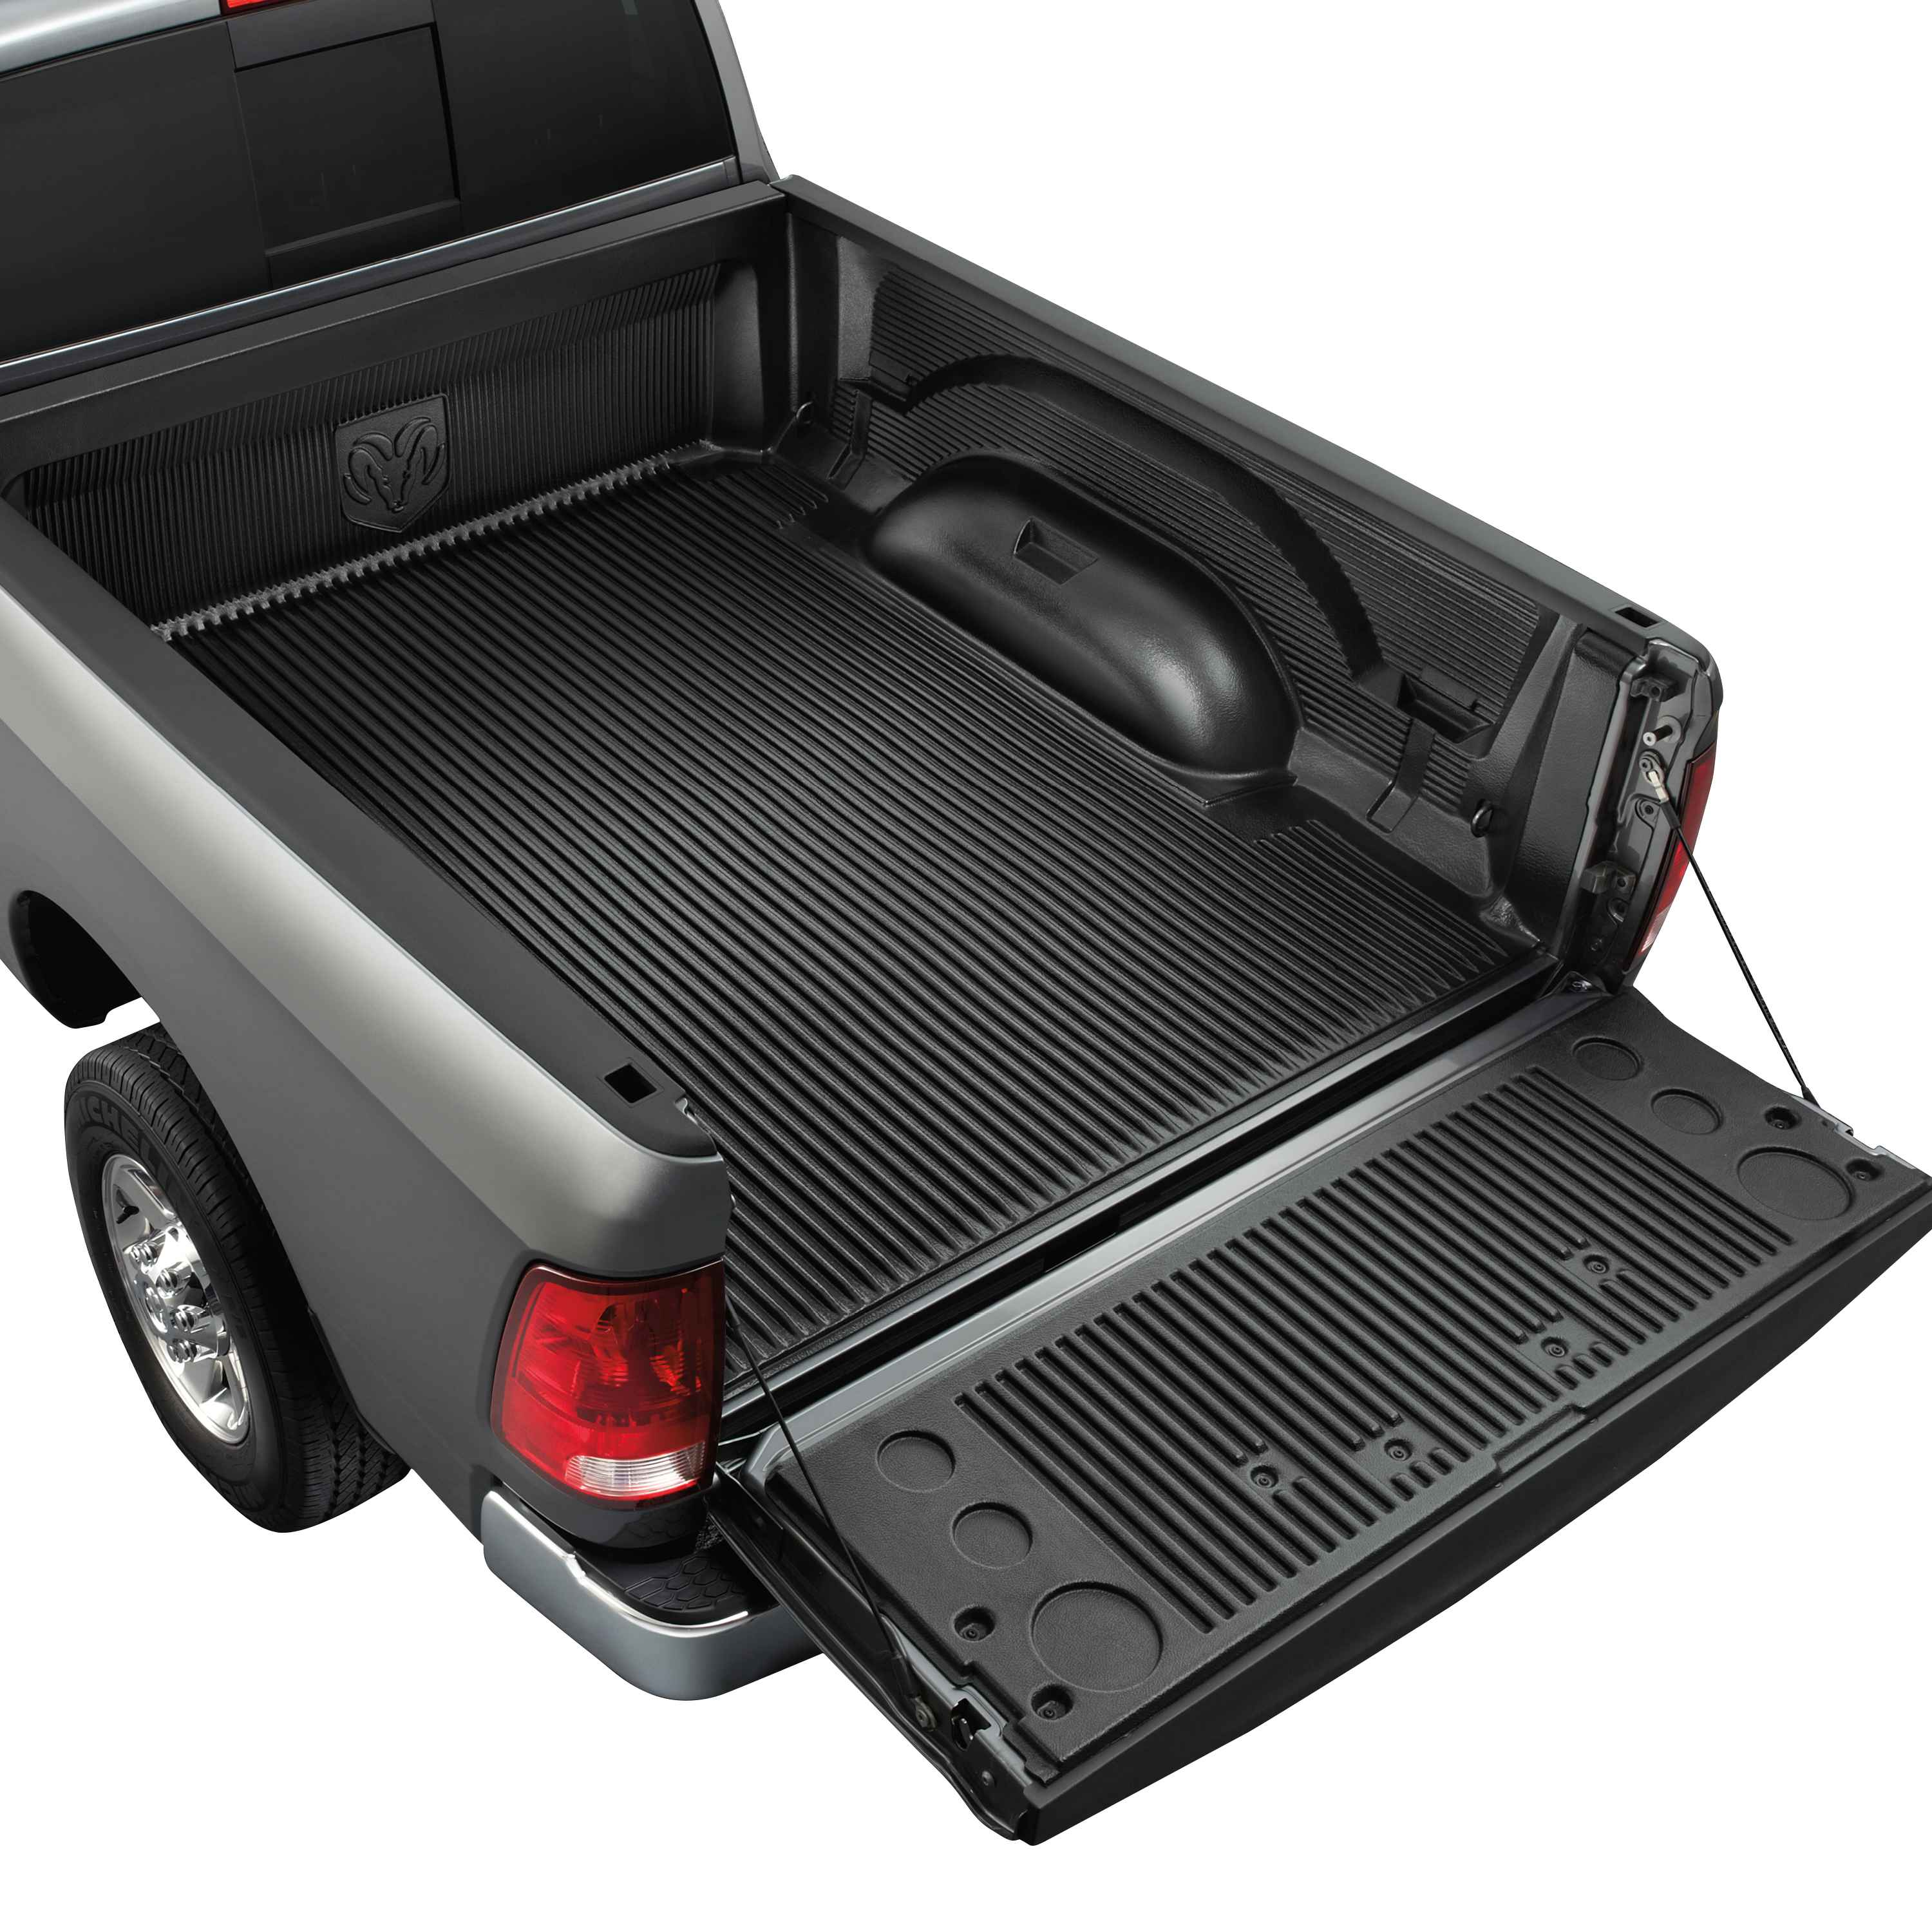 2011 RAM 2500 HD Drop-In Bedliner for 64 Conventional Bed 82214983AD